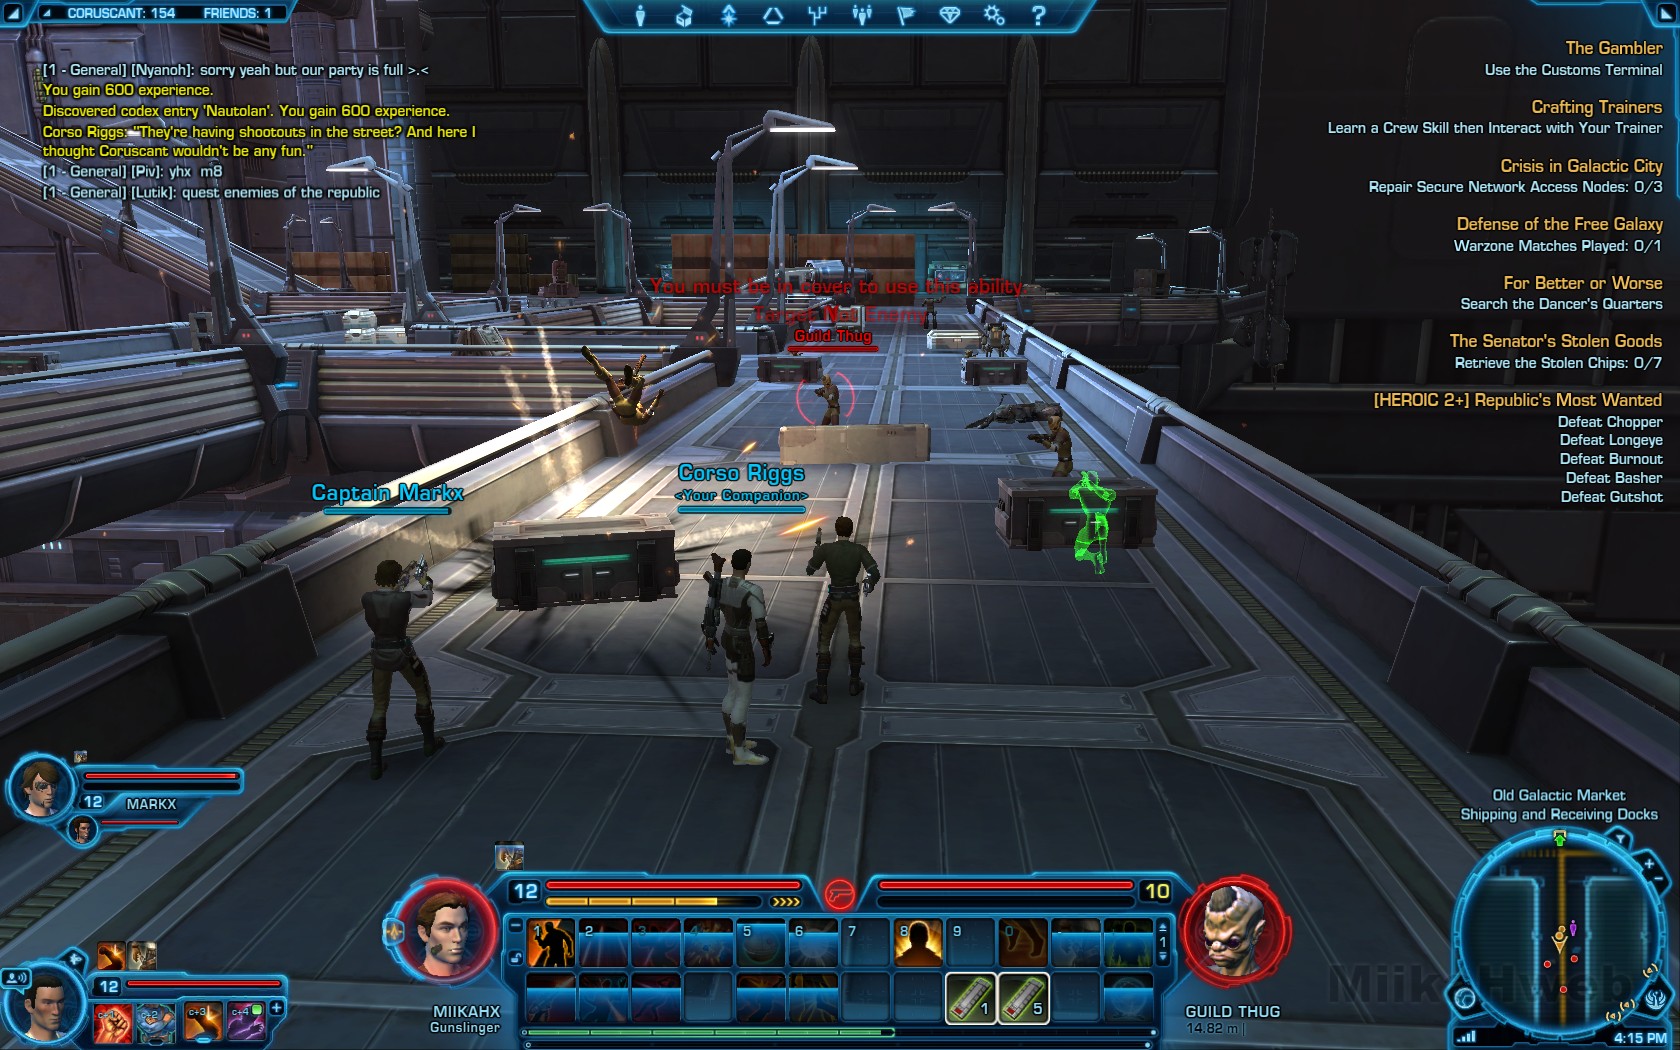 Star Wars: The Old Republic - PC - Game Games - Loja de Games Online